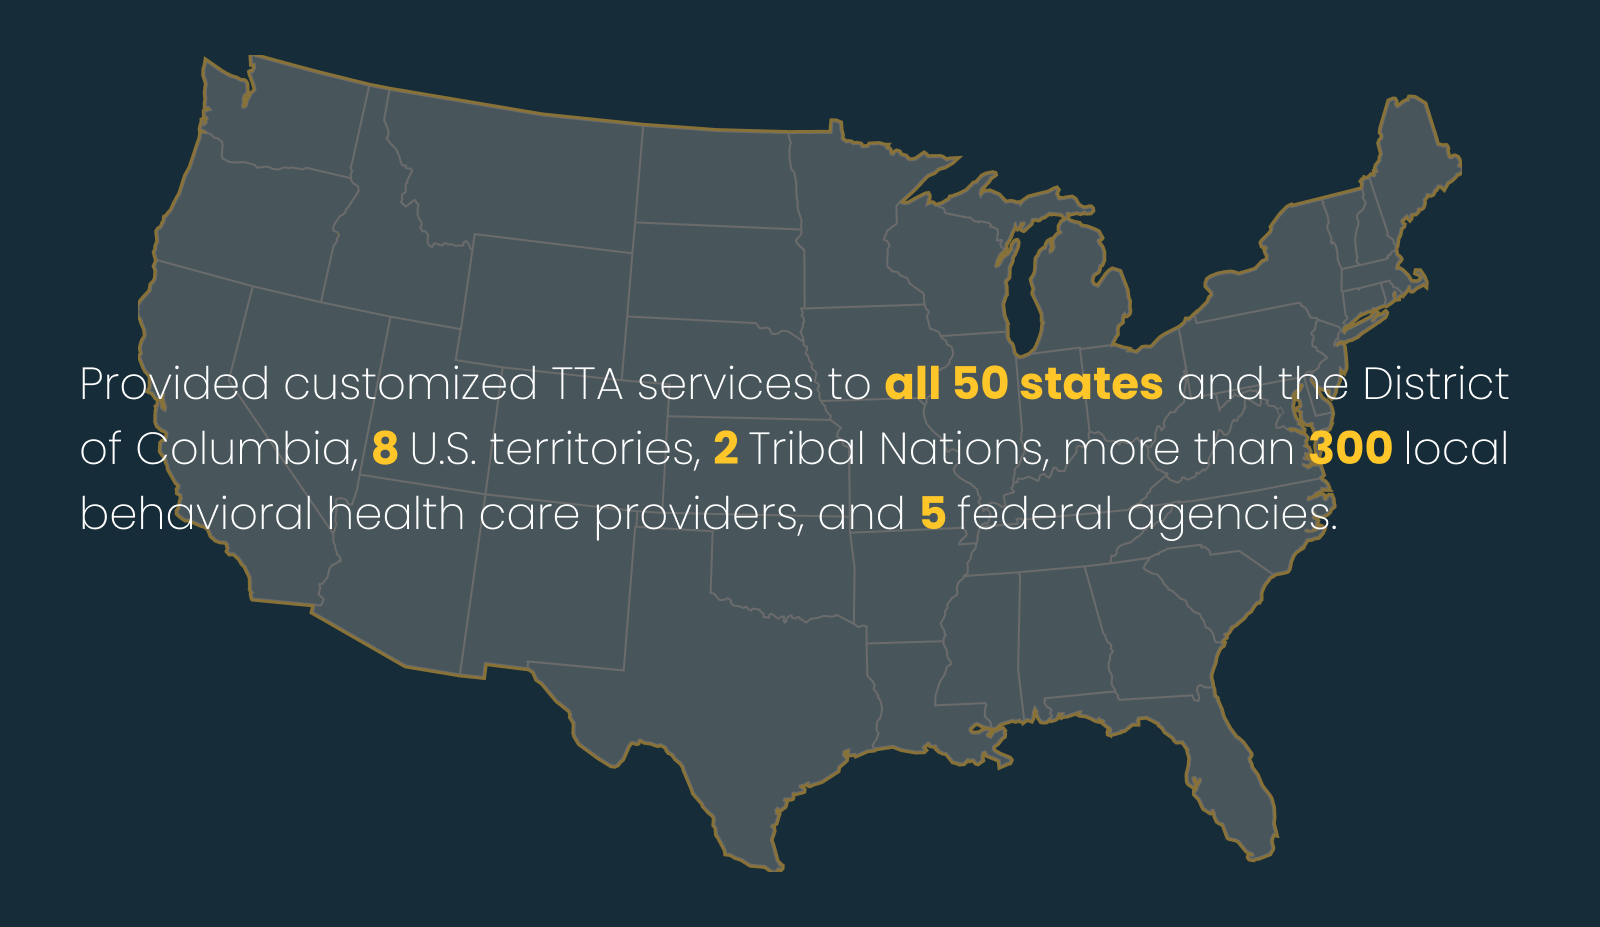 A map with text Provided customized TTA services to all 50 states and the District of Columbia, 8 U.S. territories, 2 Tribal Nations, more than 300 local behavioral health care providers, and 5 federal agencies. 